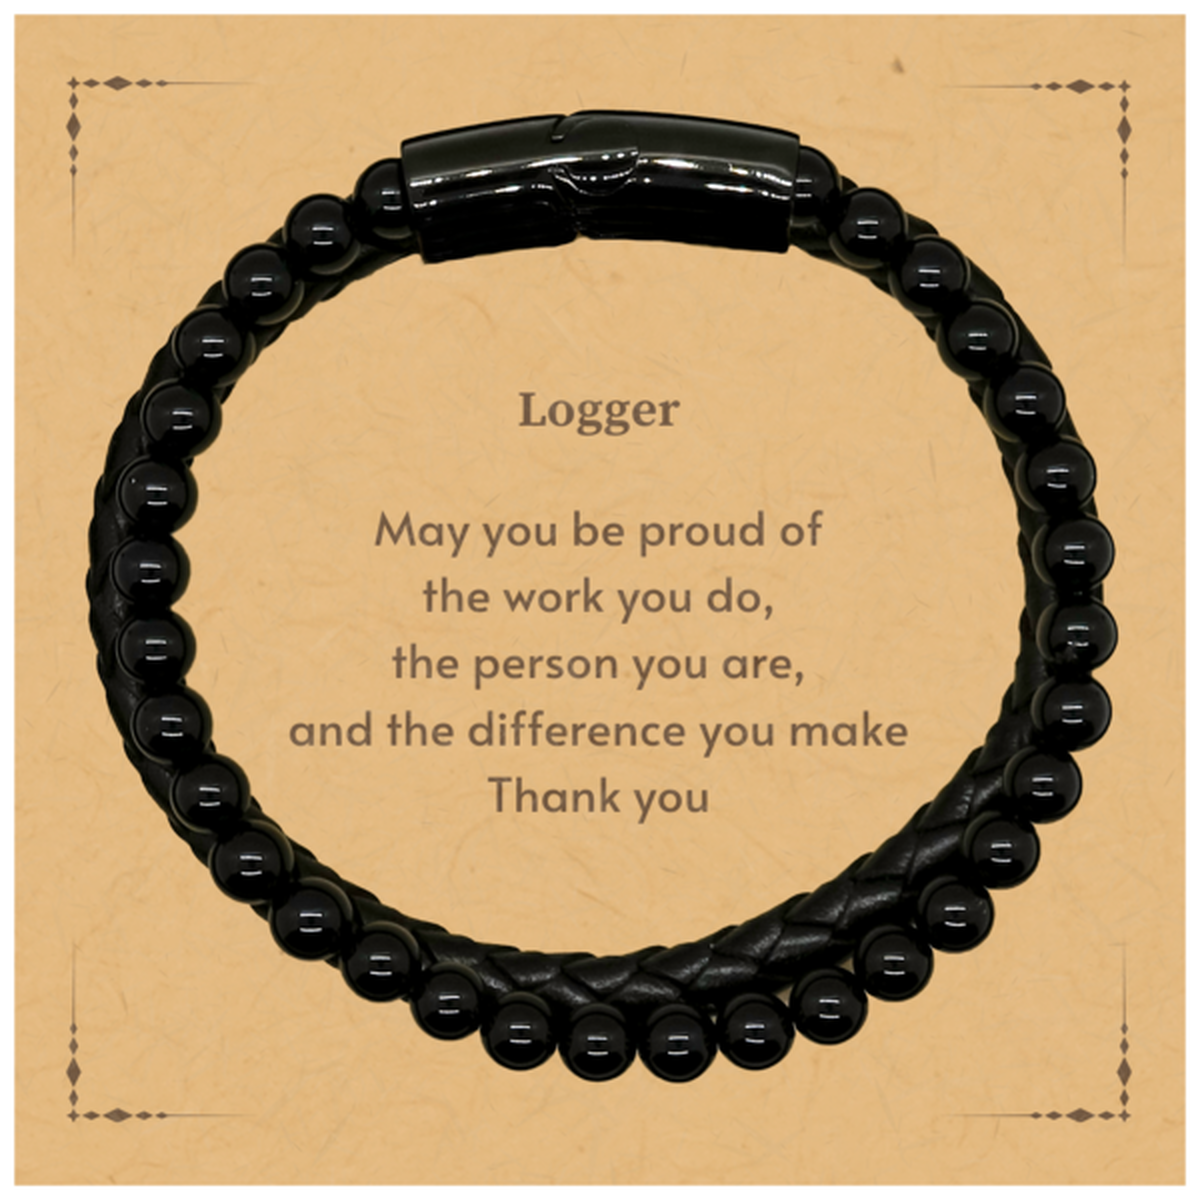 Heartwarming Stone Leather Bracelets Retirement Coworkers Gifts for Logger, Logger May You be proud of the work you do, the person you are Gifts for Boss Men Women Friends